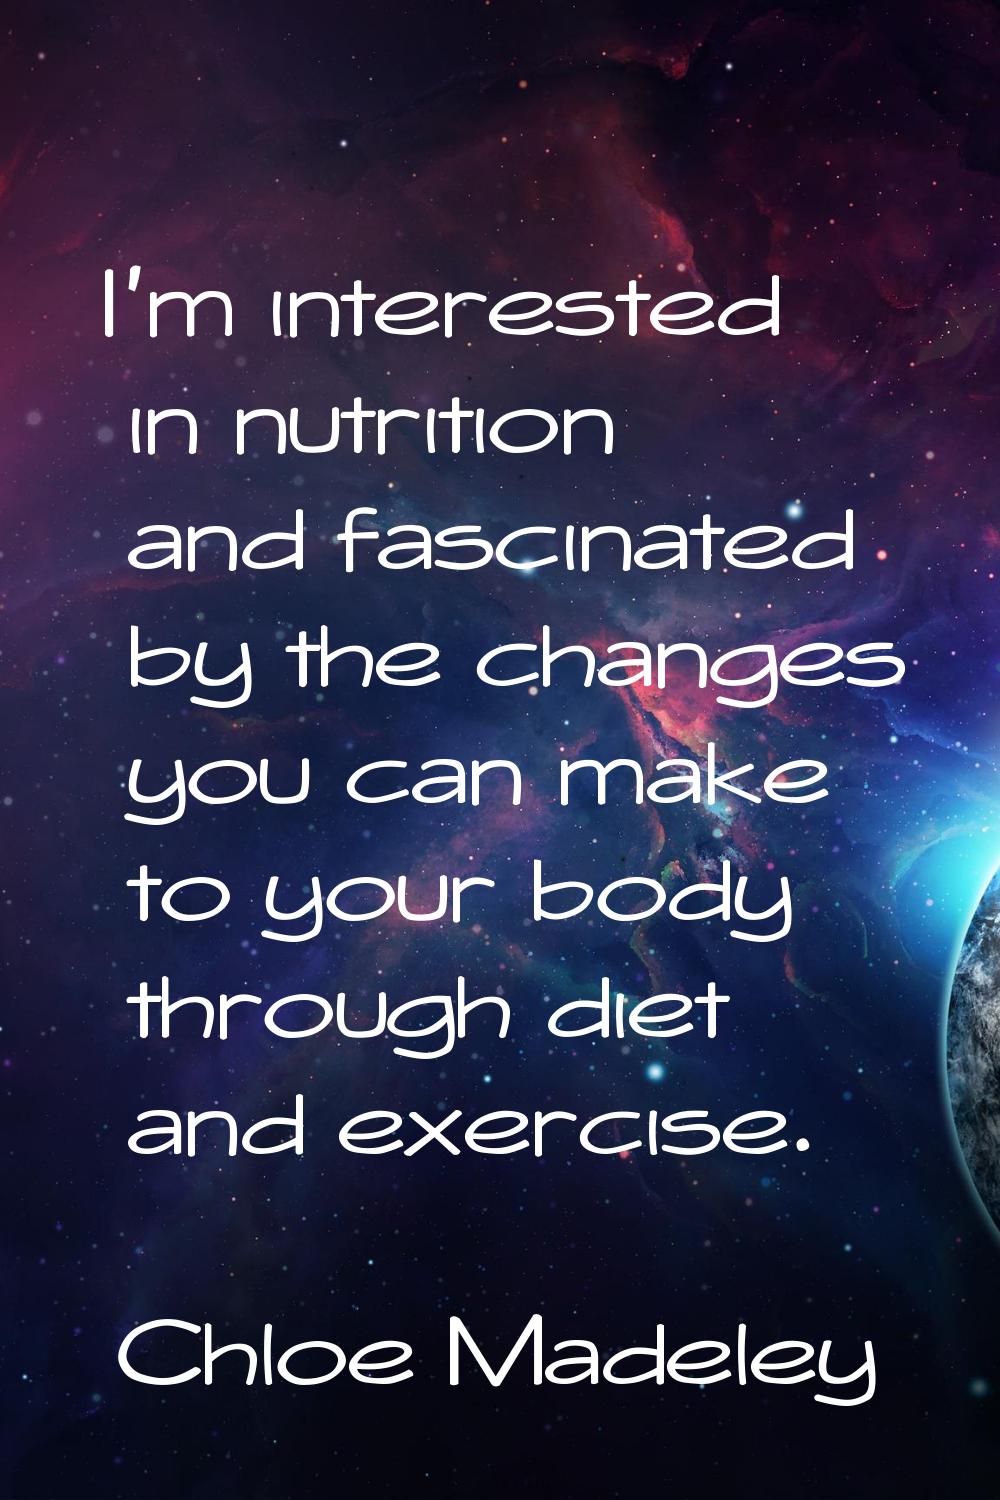 I'm interested in nutrition and fascinated by the changes you can make to your body through diet an